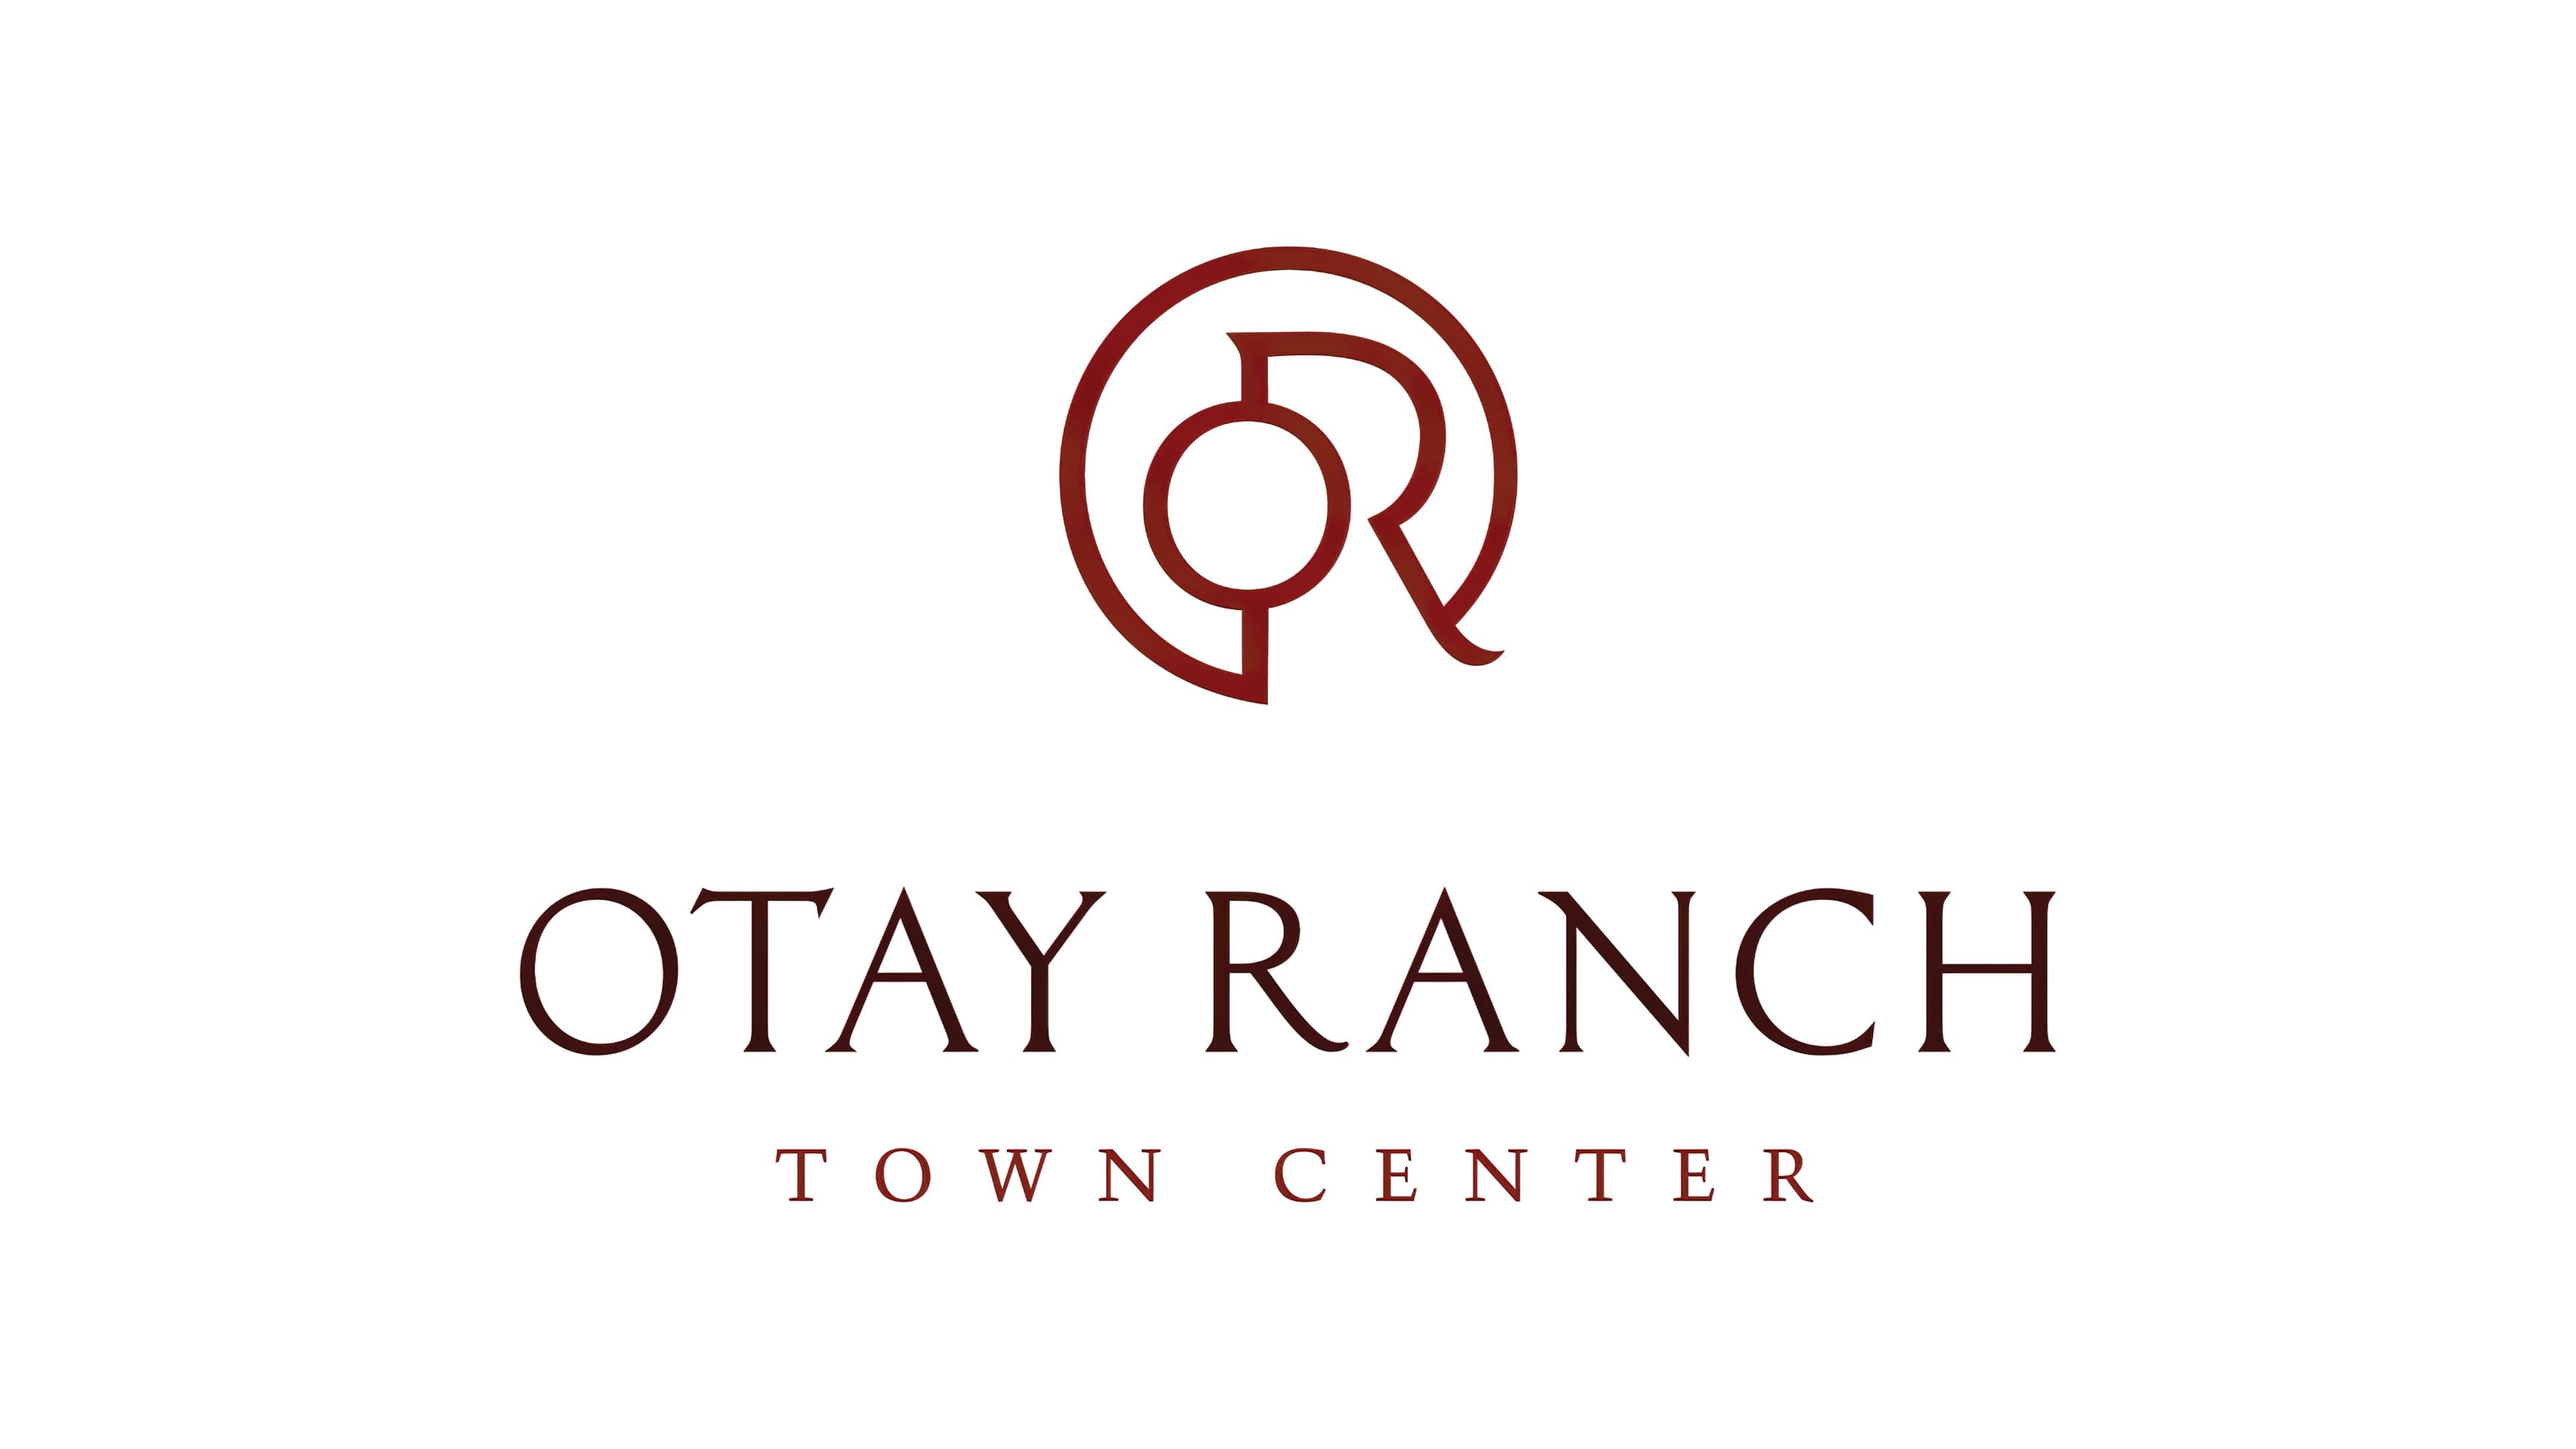 Otay Ranch brand logo styled to resemble a cattle-brand